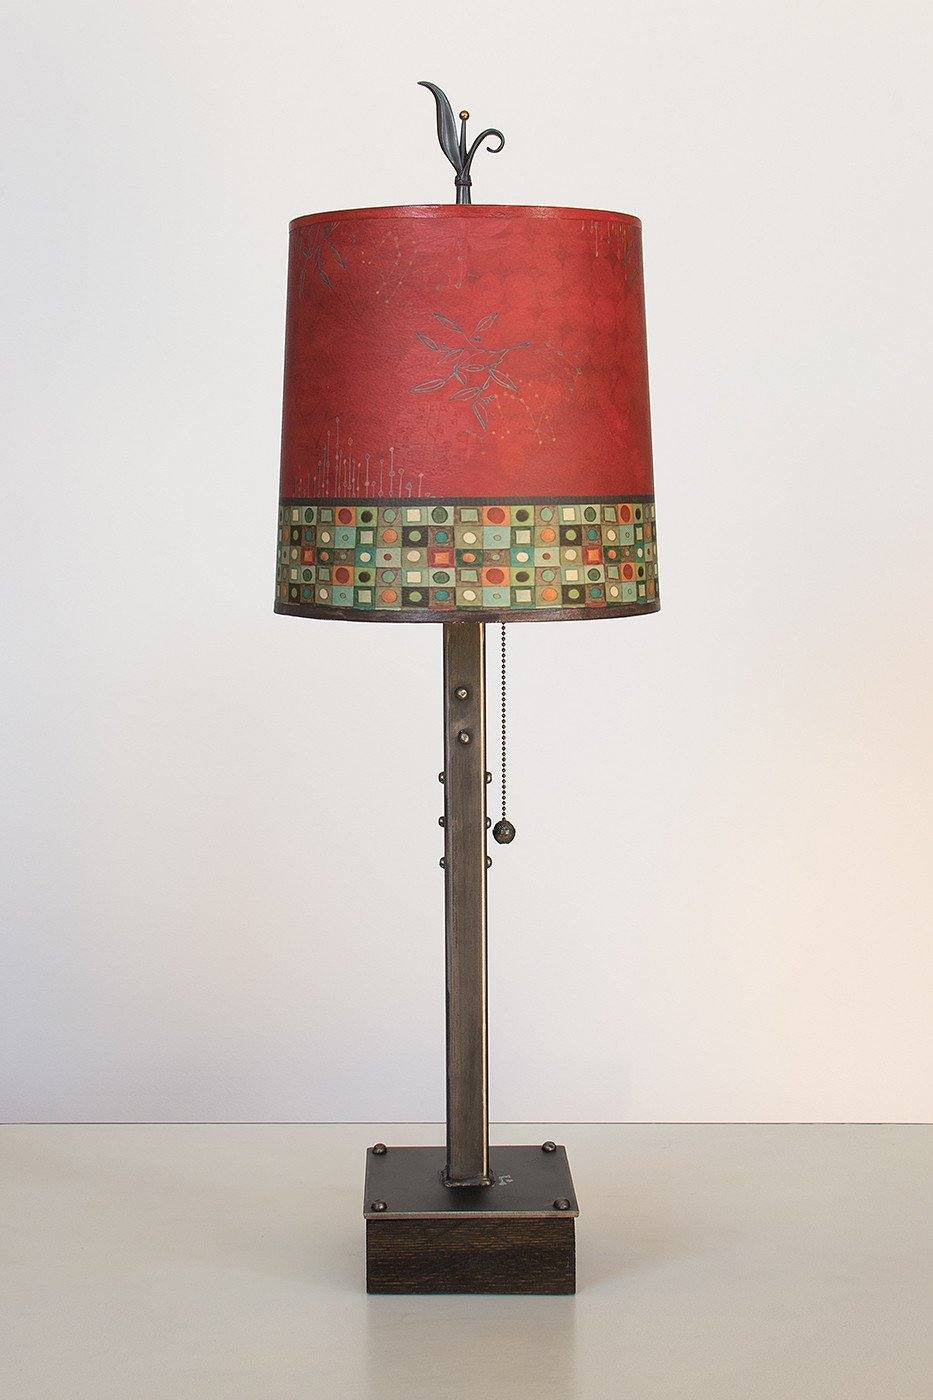 Janna Ugone & Co Table Lamps Steel Table Lamp on Wood with Medium Drum Shade in Red Mosaic